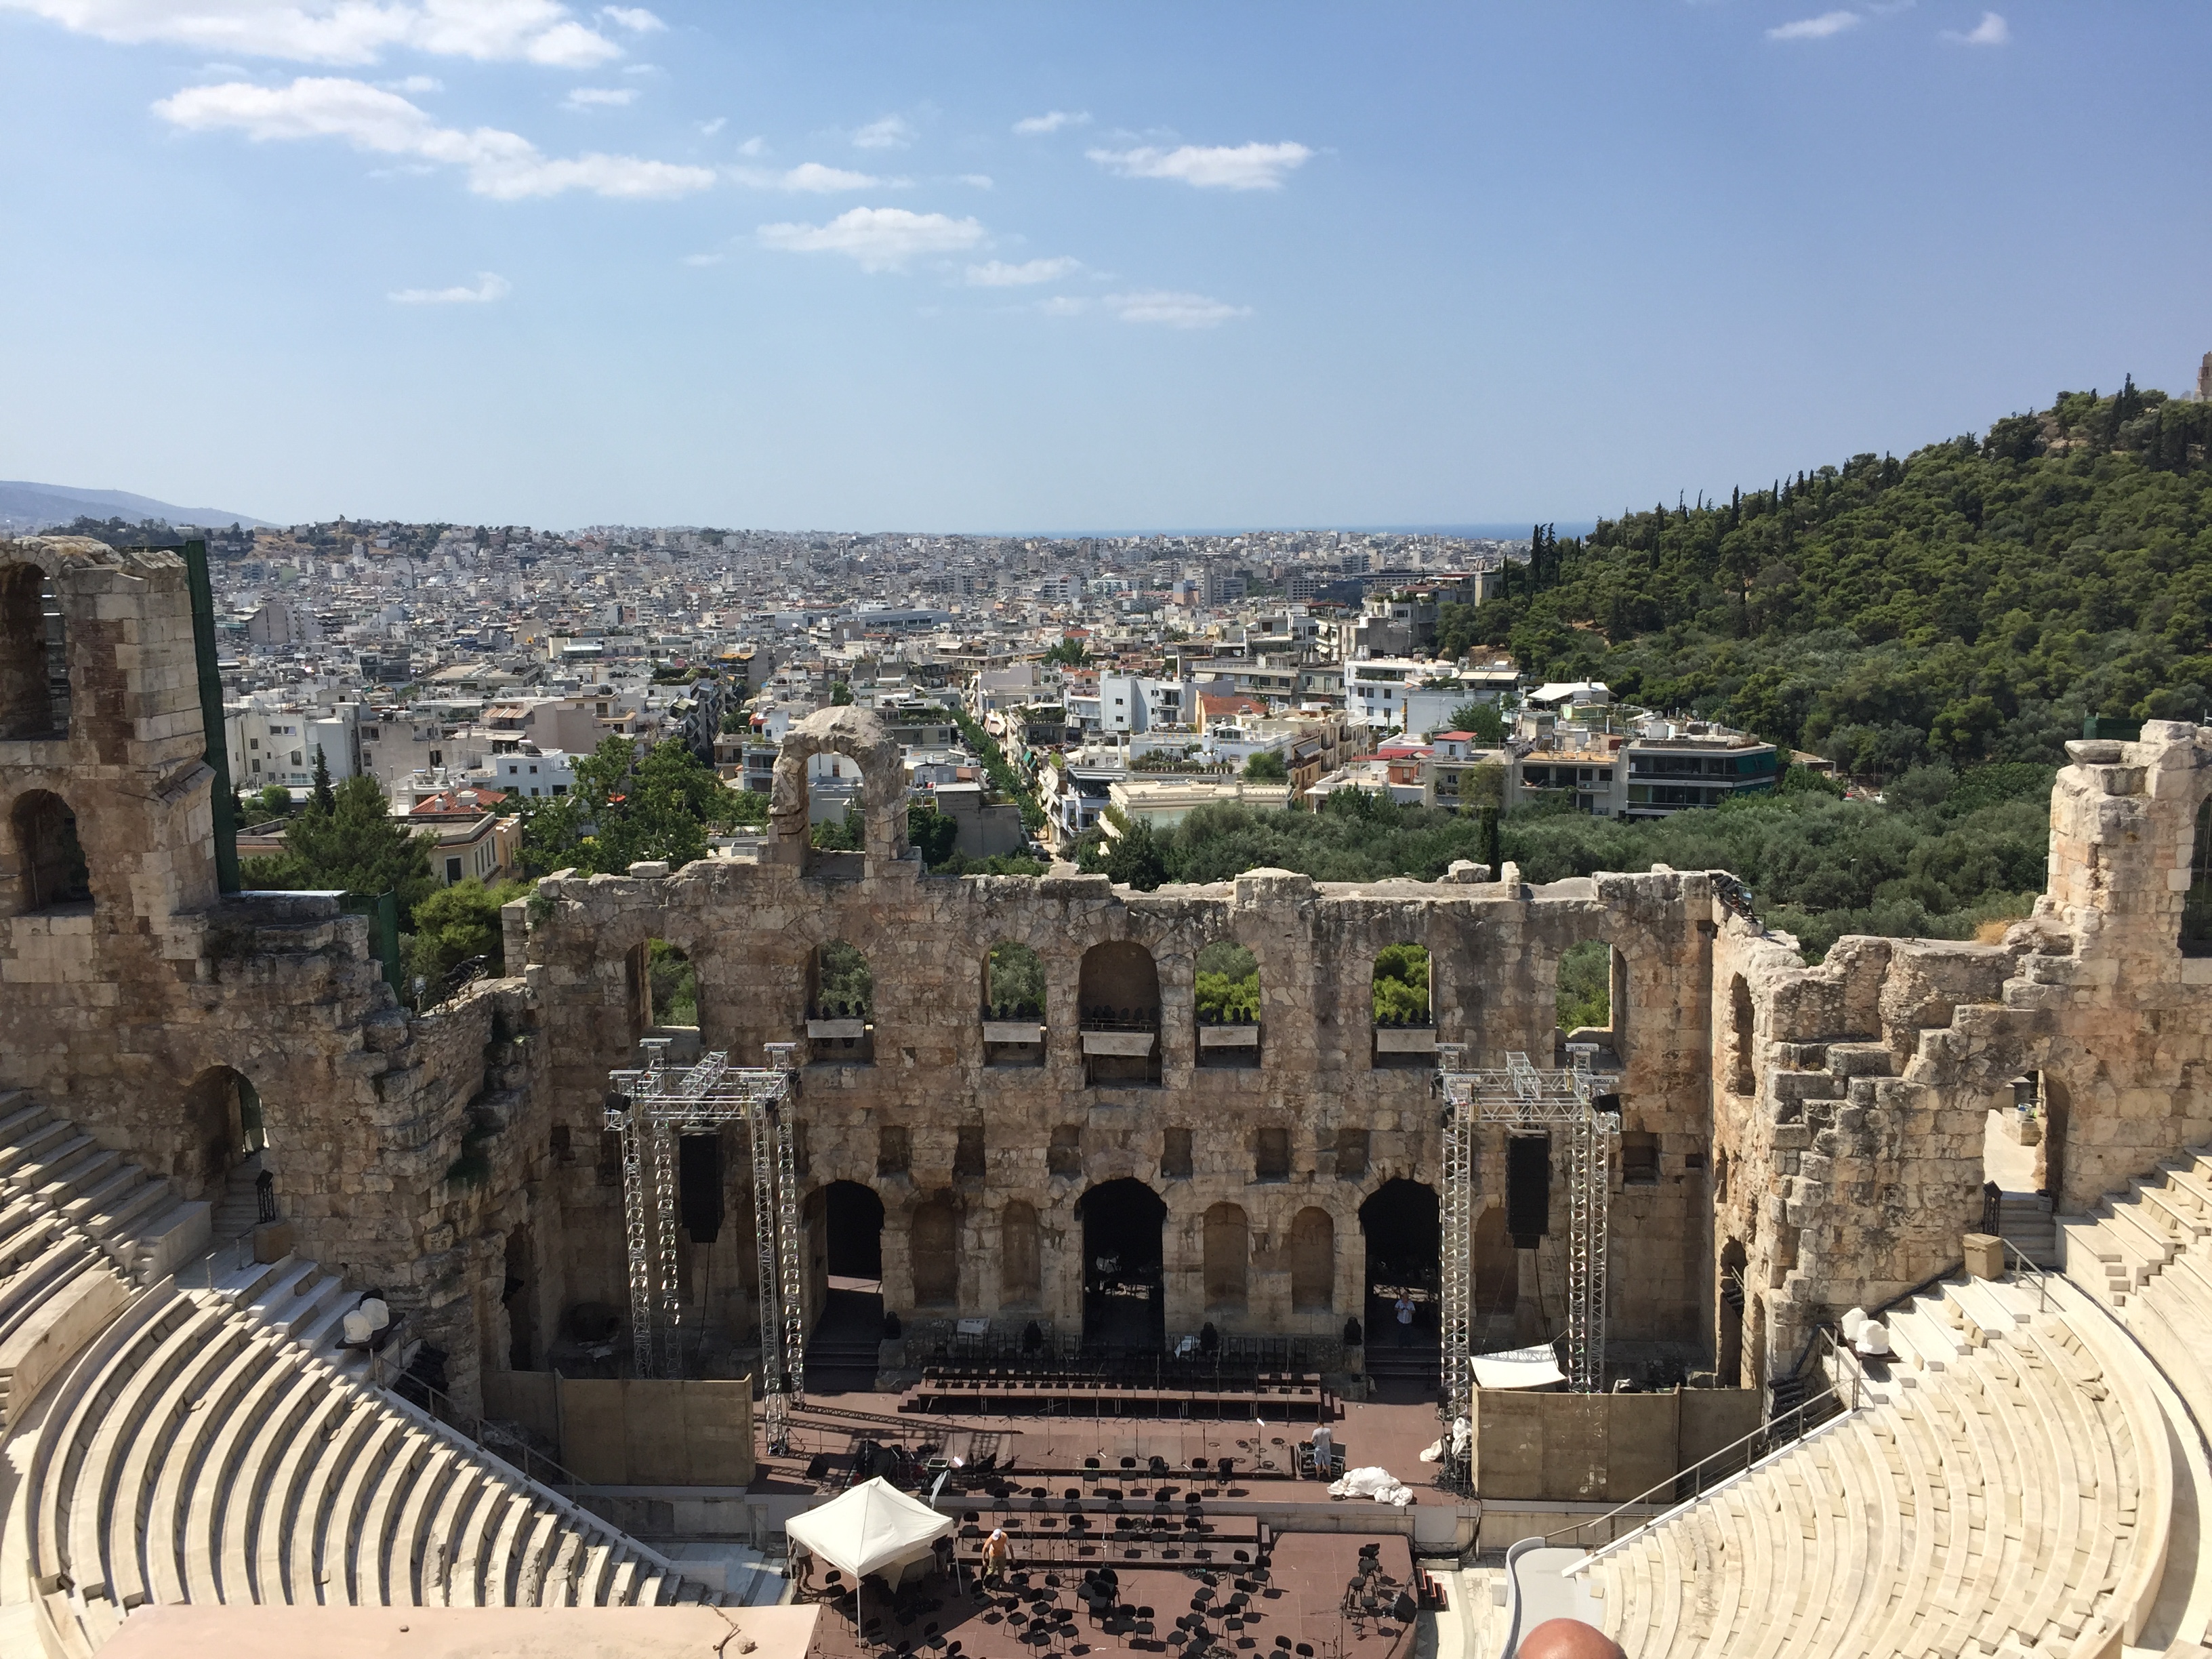 A Quick Trip To The Acropolis And Parthenon.  Athens & Paris For Dollars A Day